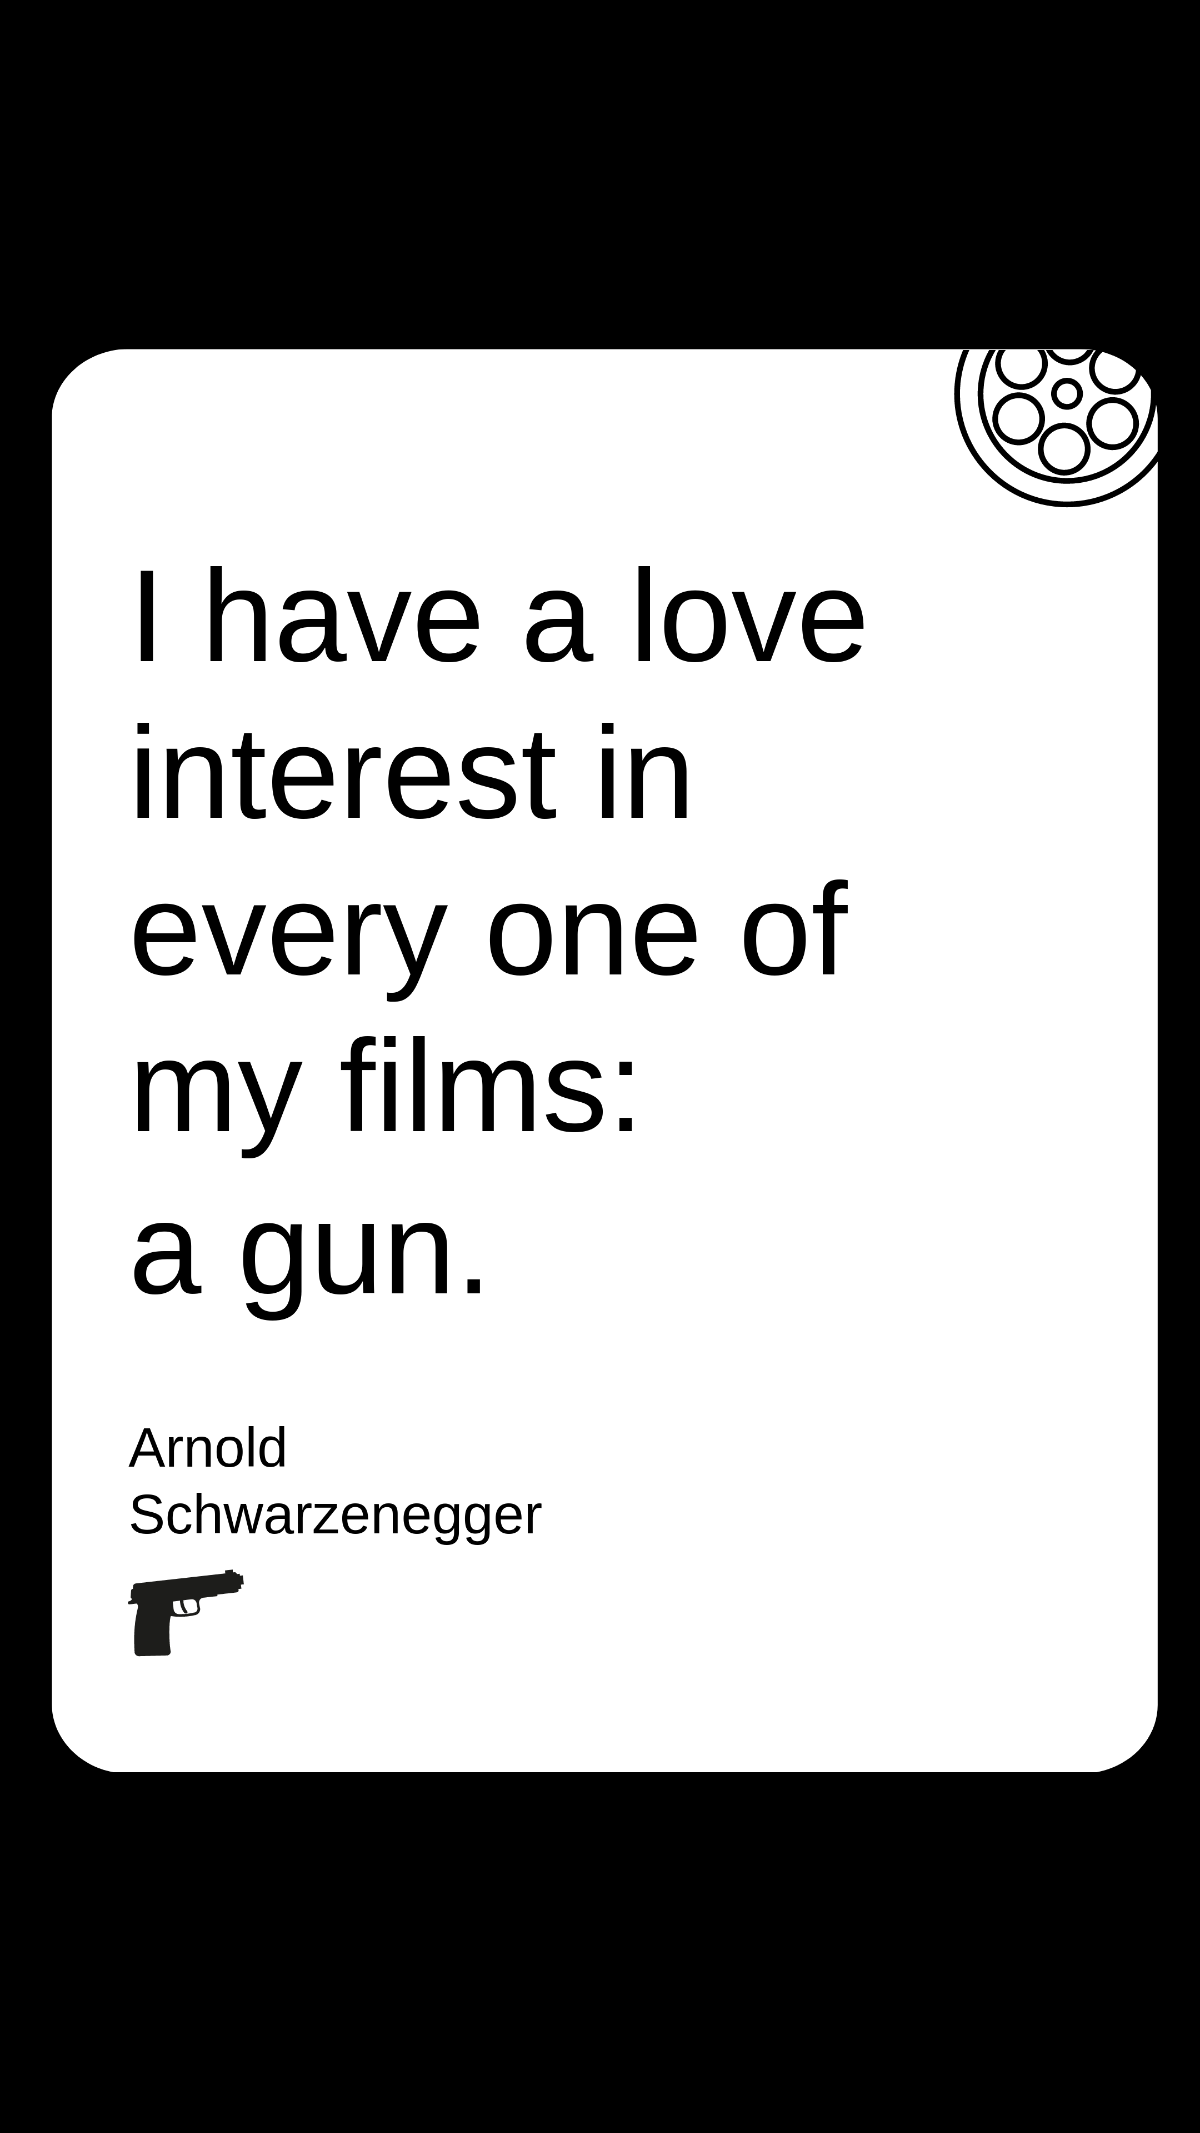 Arnold Schwarzenegger - I have a love interest in every one of my films: a gun.